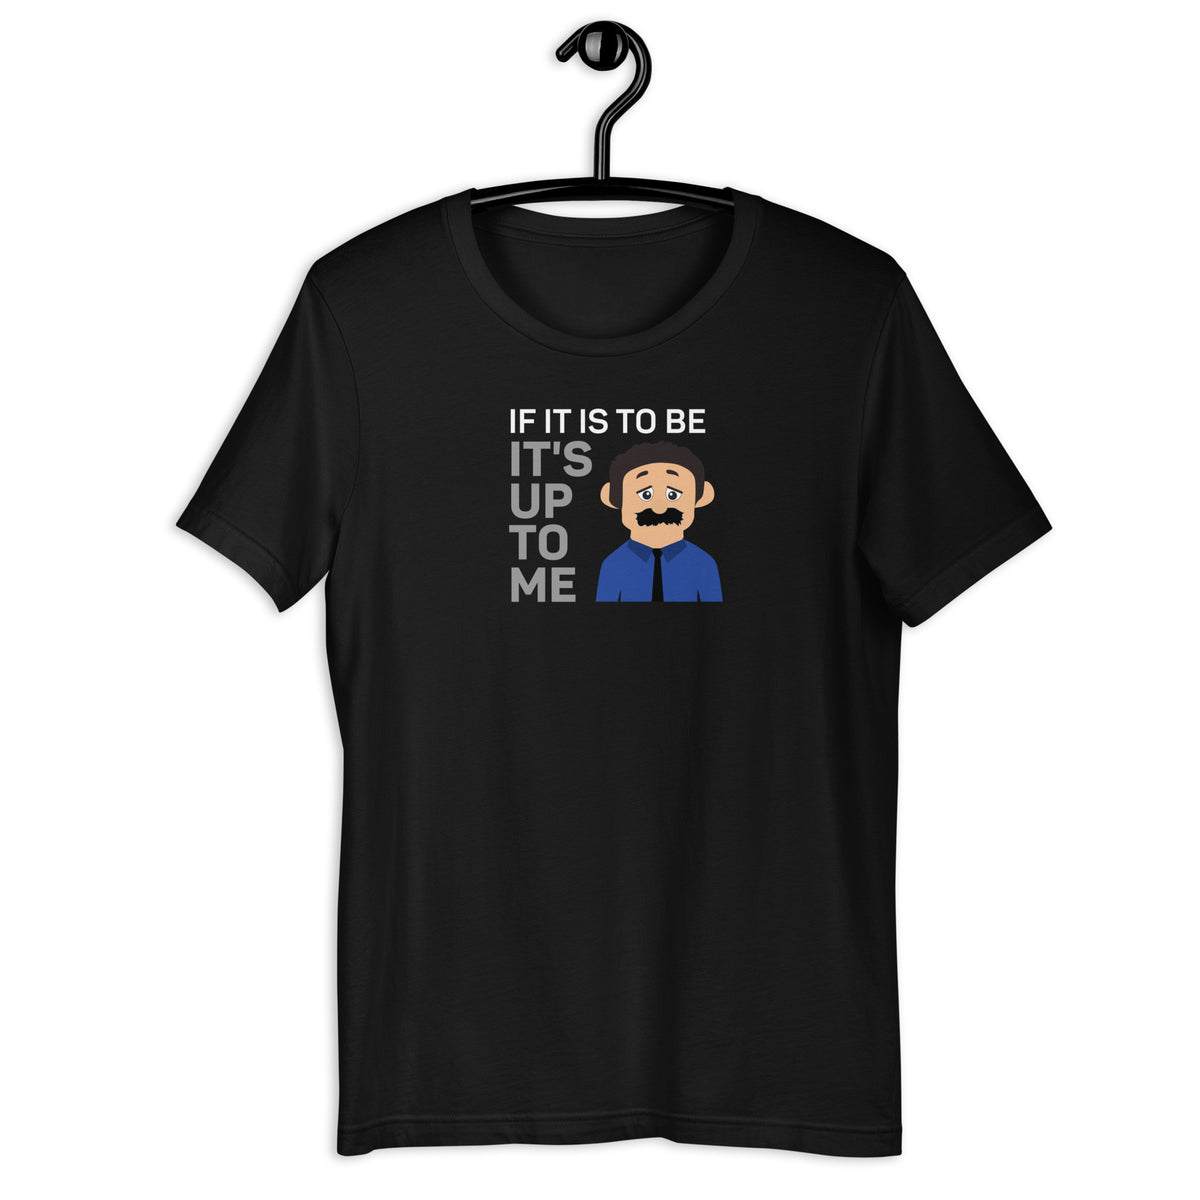 If It Is To Be It's Up To Me Awkward Puppets Diego T-shirt - SHOPNOO